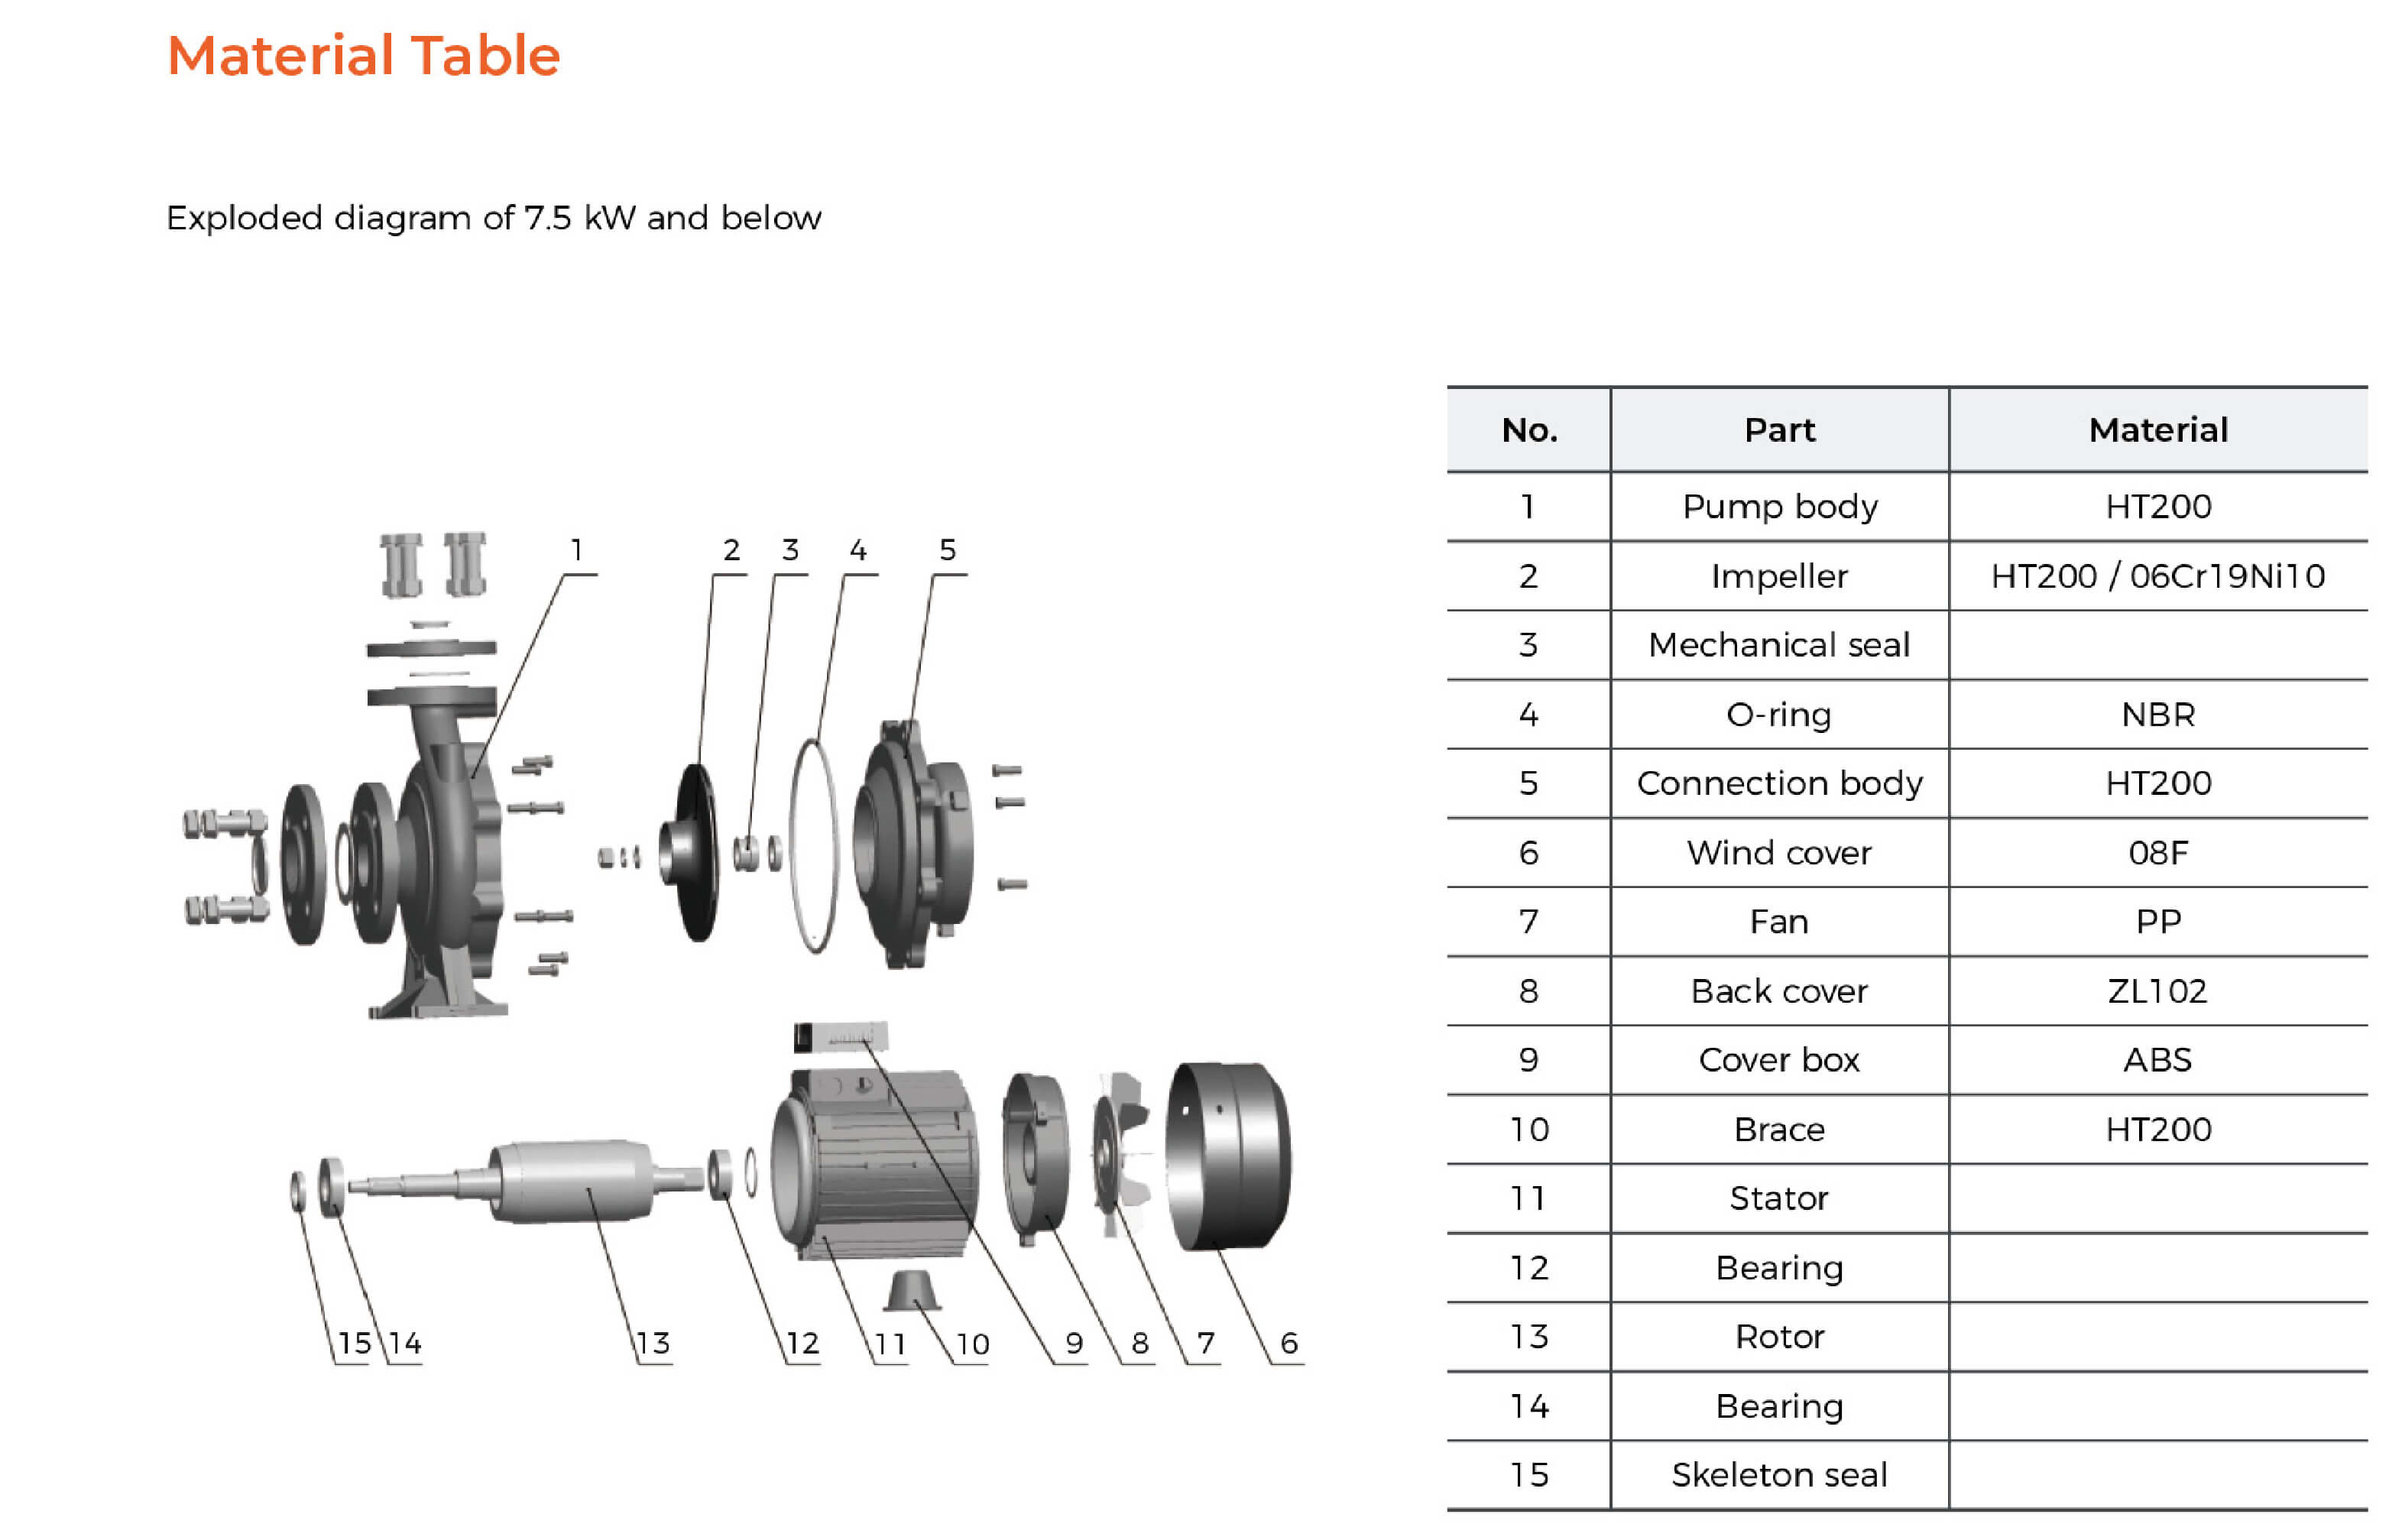 XST Standard Centrifugal Pump Material Table 7.5kw and below